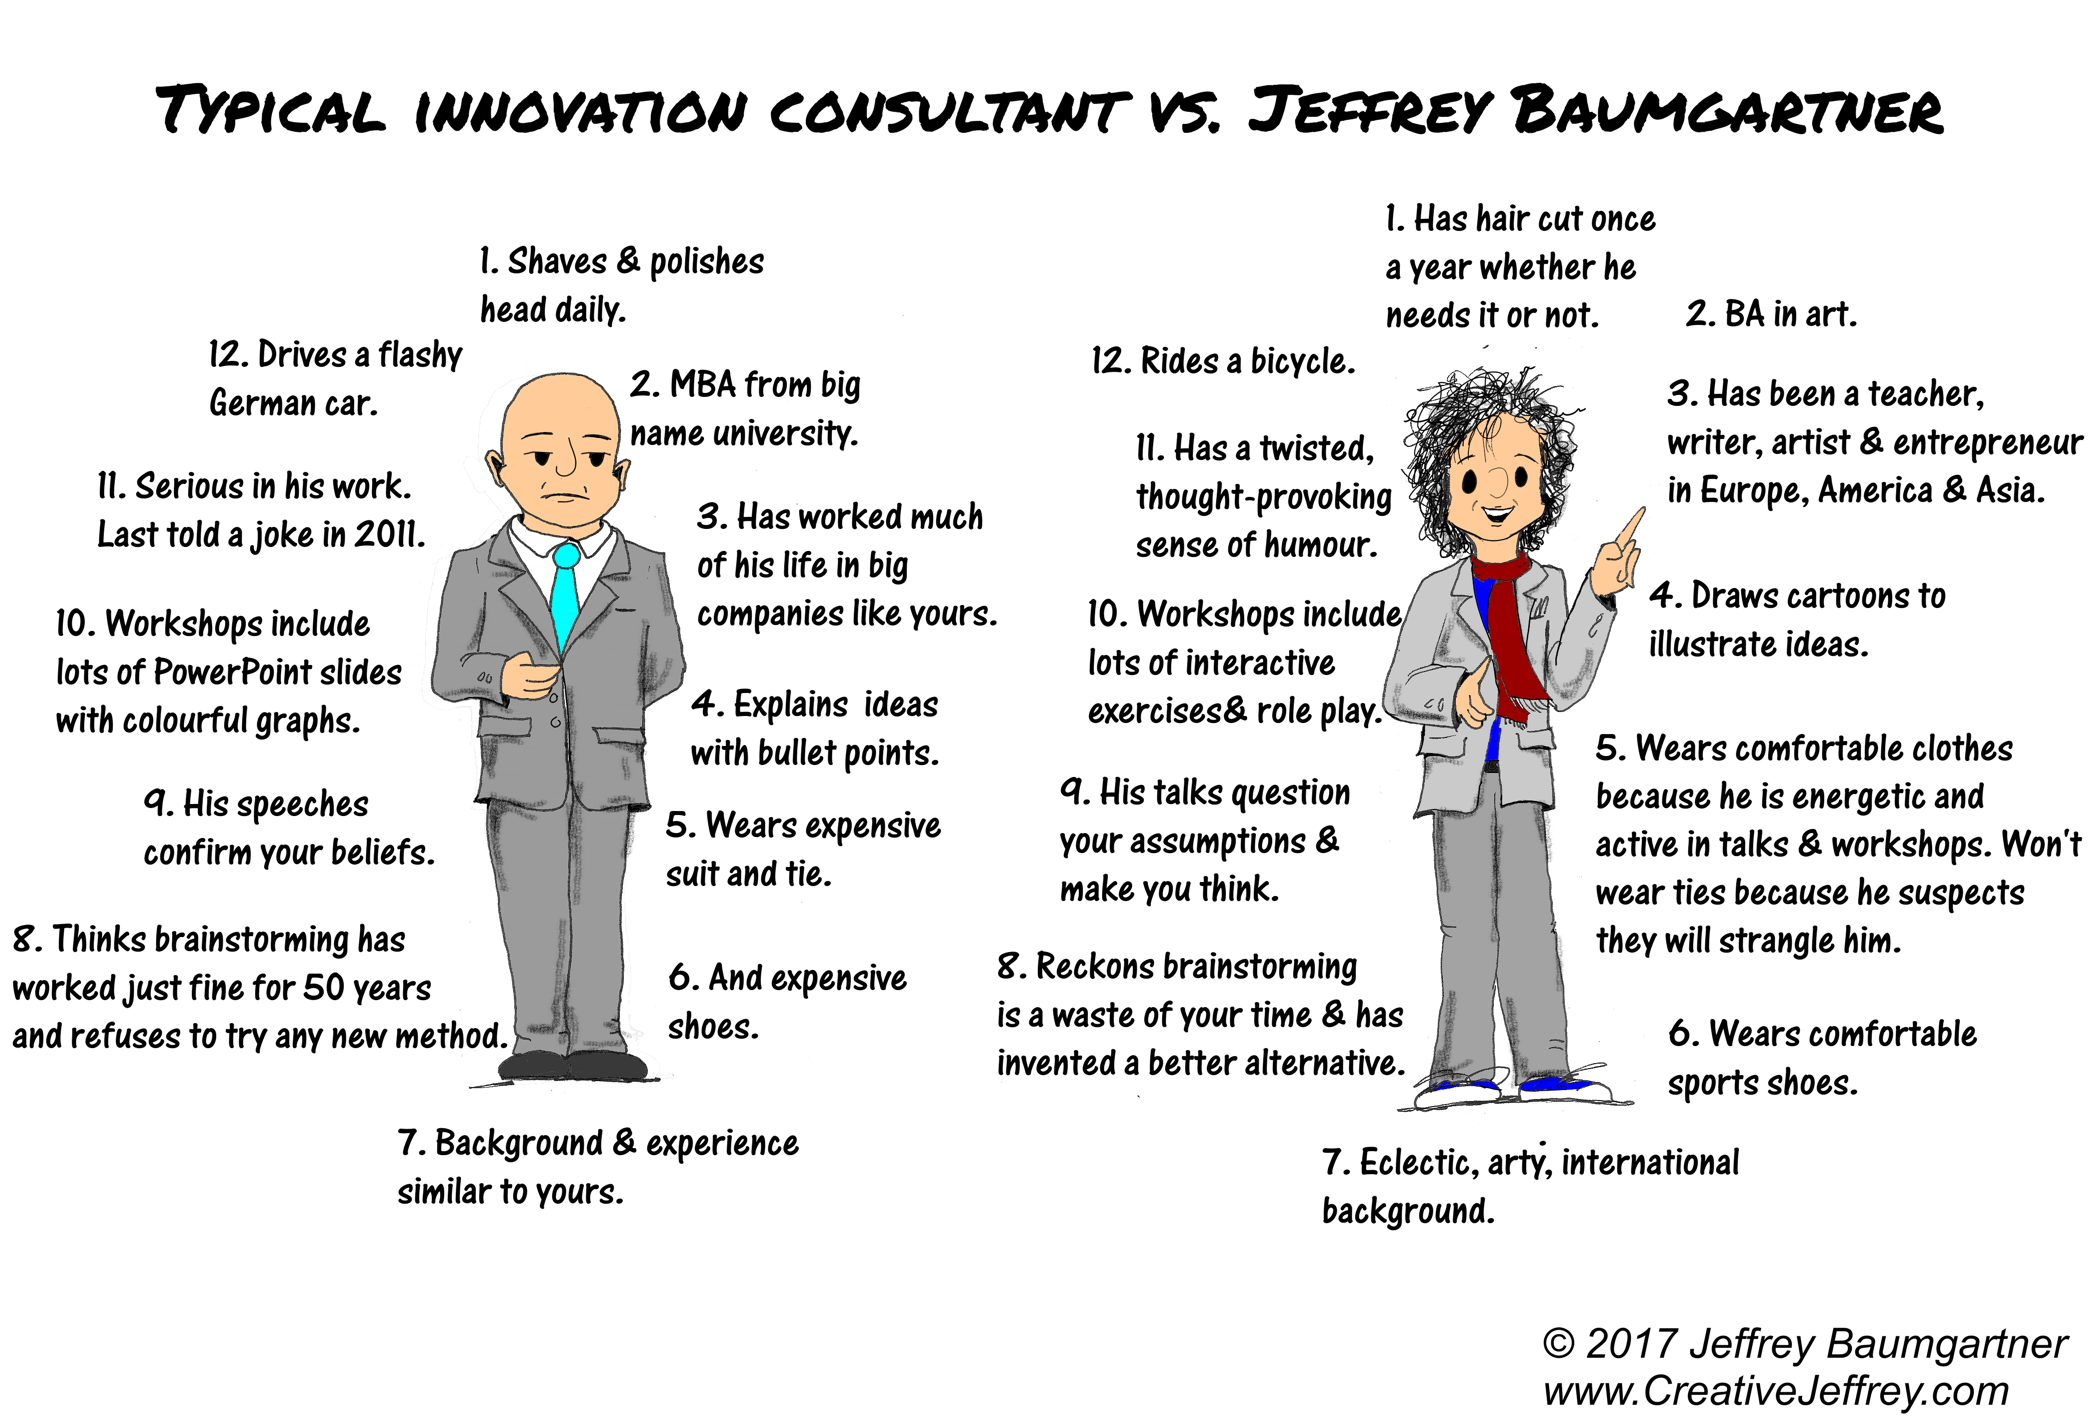 Cartoon comparing typical innovation consultant to Jeffrey (enlarged)